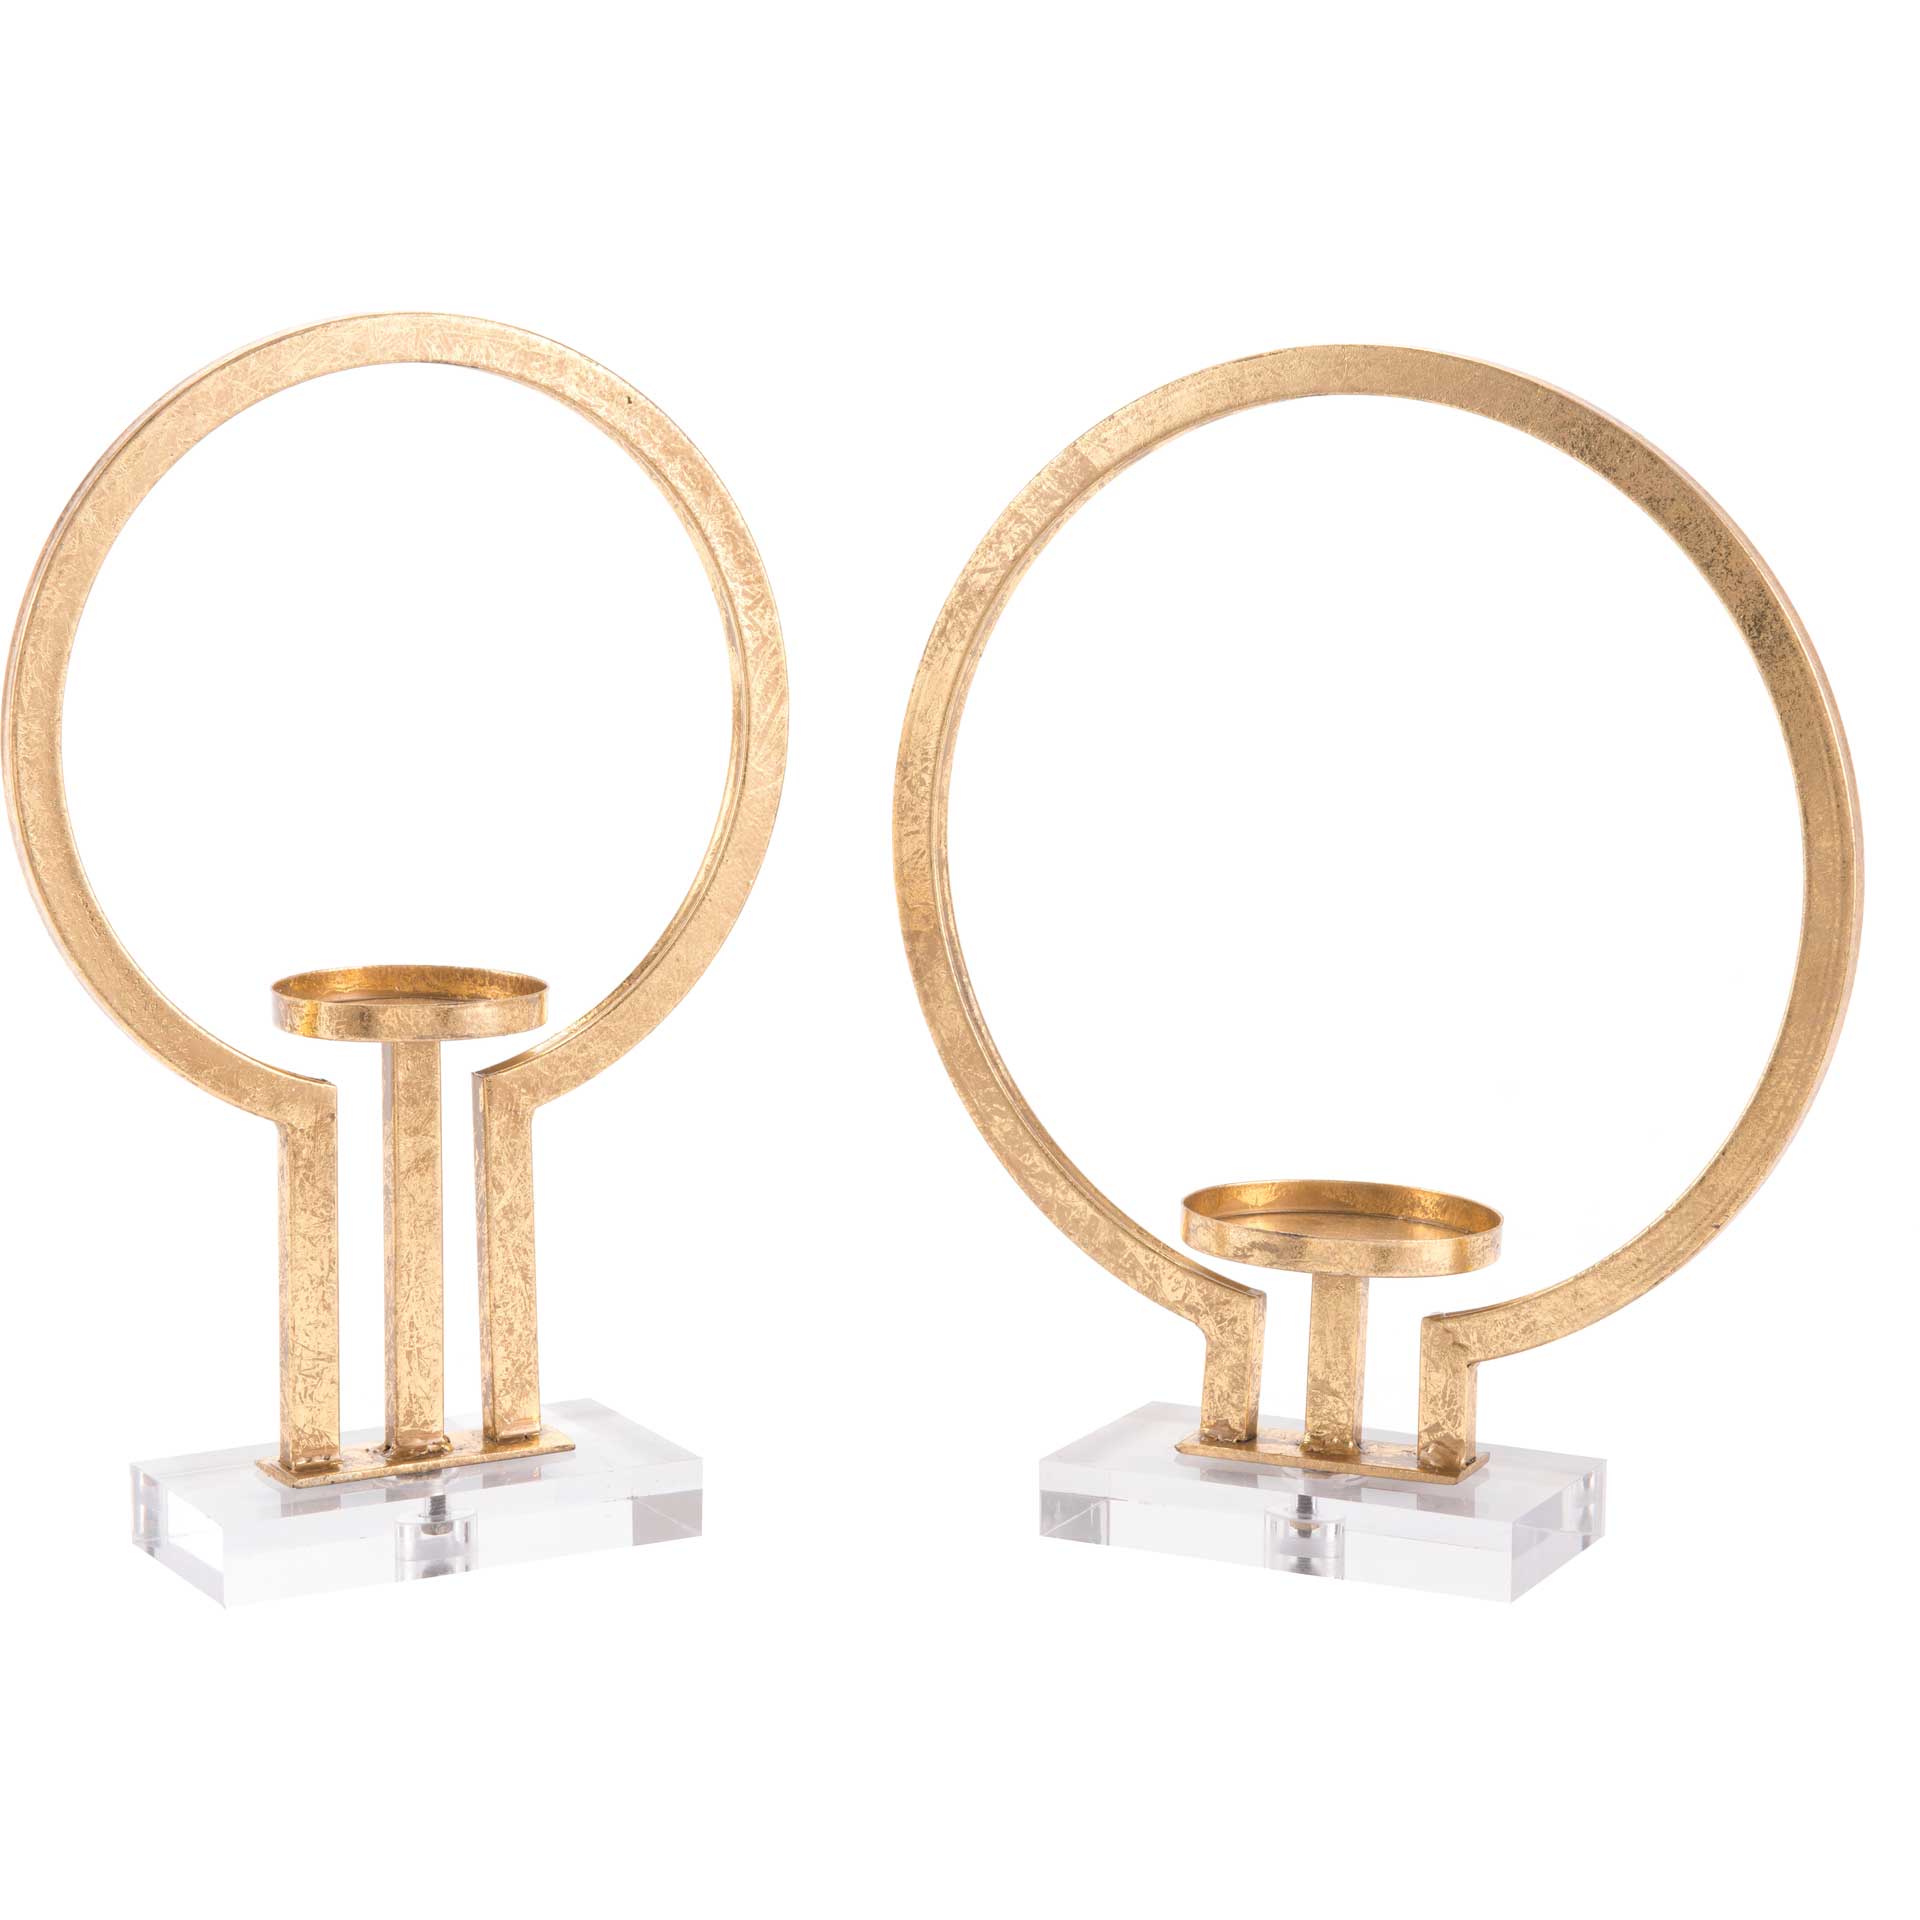 Oly Candle Holders Gold (Set of 2)